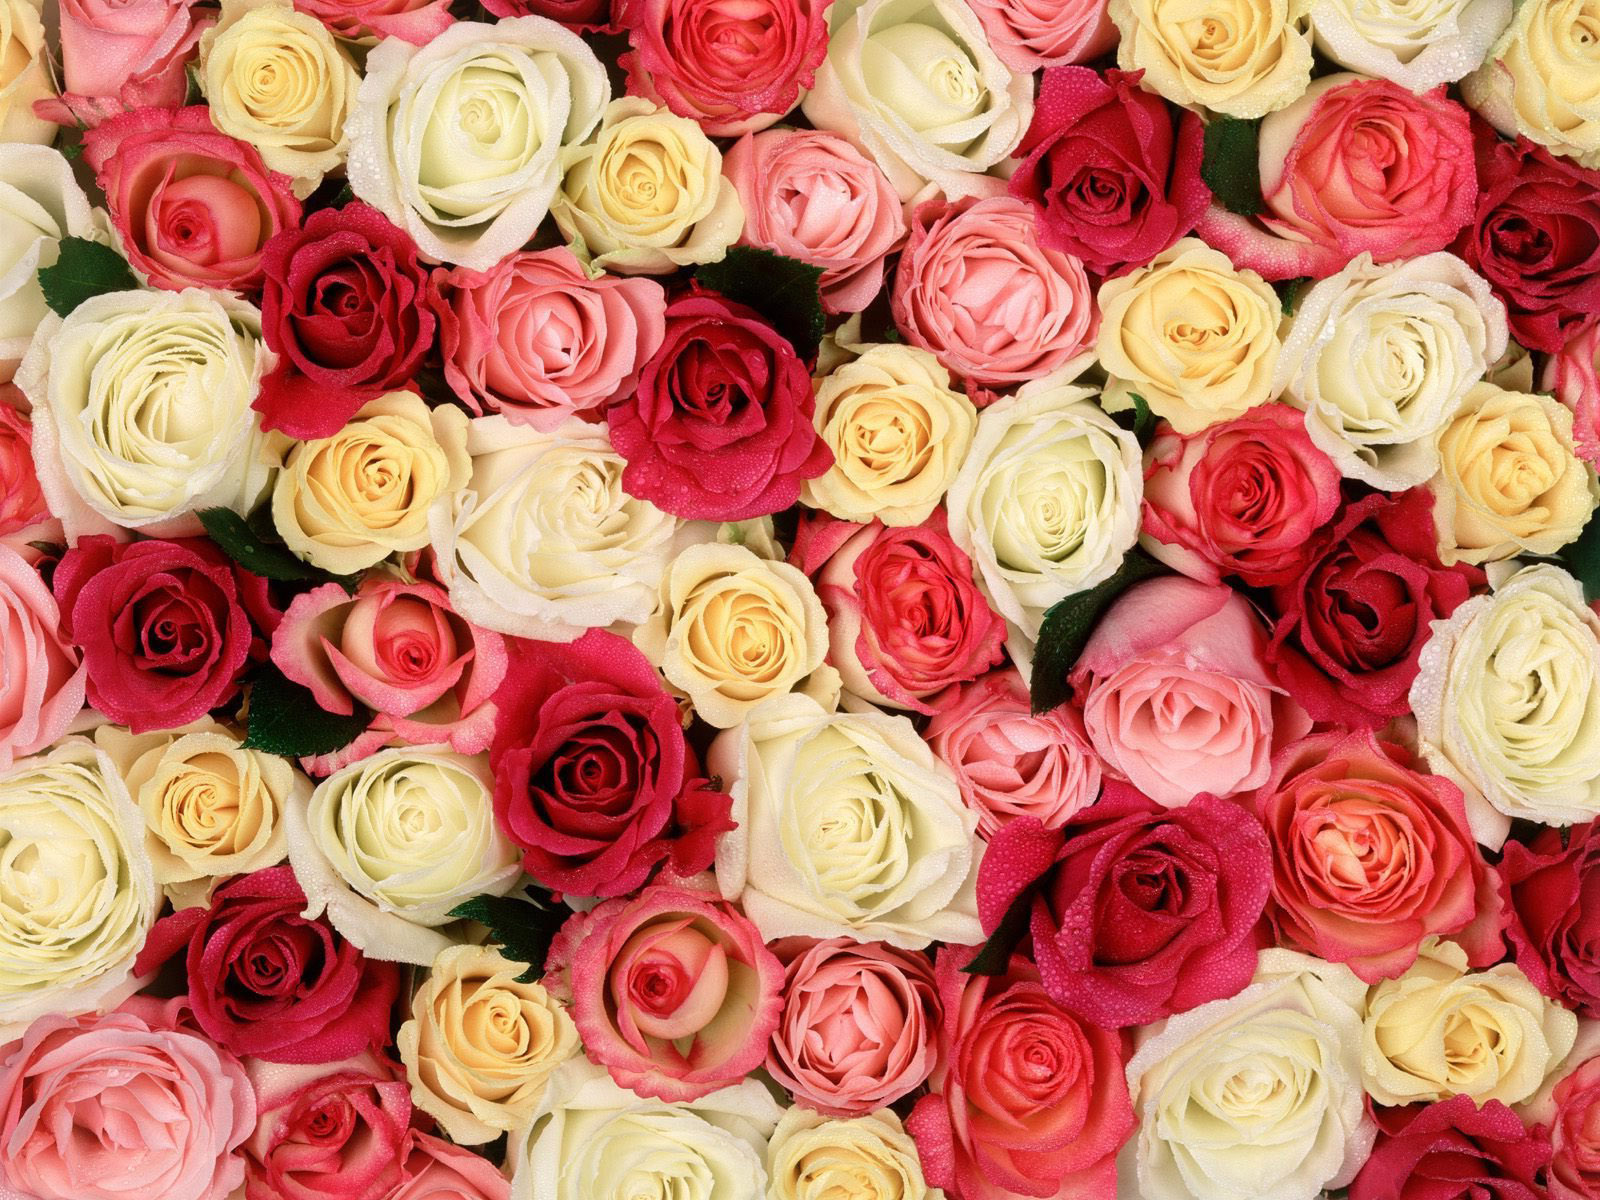 Roses Background | Gallery Yopriceville - High-Quality Free Images and ...